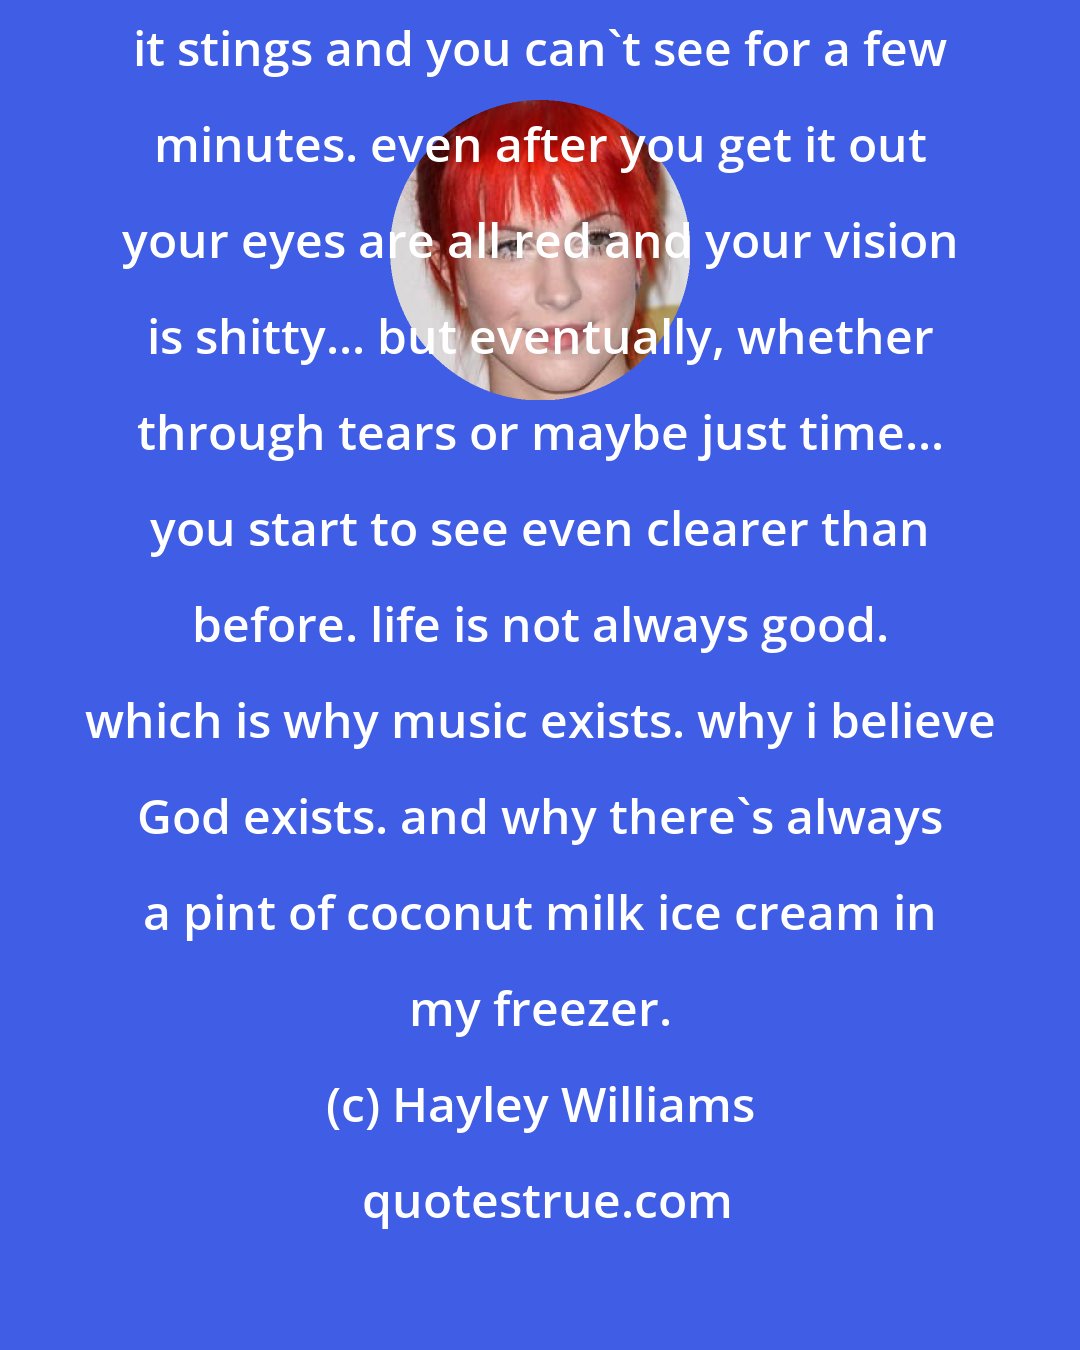 Hayley Williams: sometimes you get run down. sometimes life throws dirt in your eyes and it stings and you can't see for a few minutes. even after you get it out your eyes are all red and your vision is shitty... but eventually, whether through tears or maybe just time... you start to see even clearer than before. life is not always good. which is why music exists. why i believe God exists. and why there's always a pint of coconut milk ice cream in my freezer.